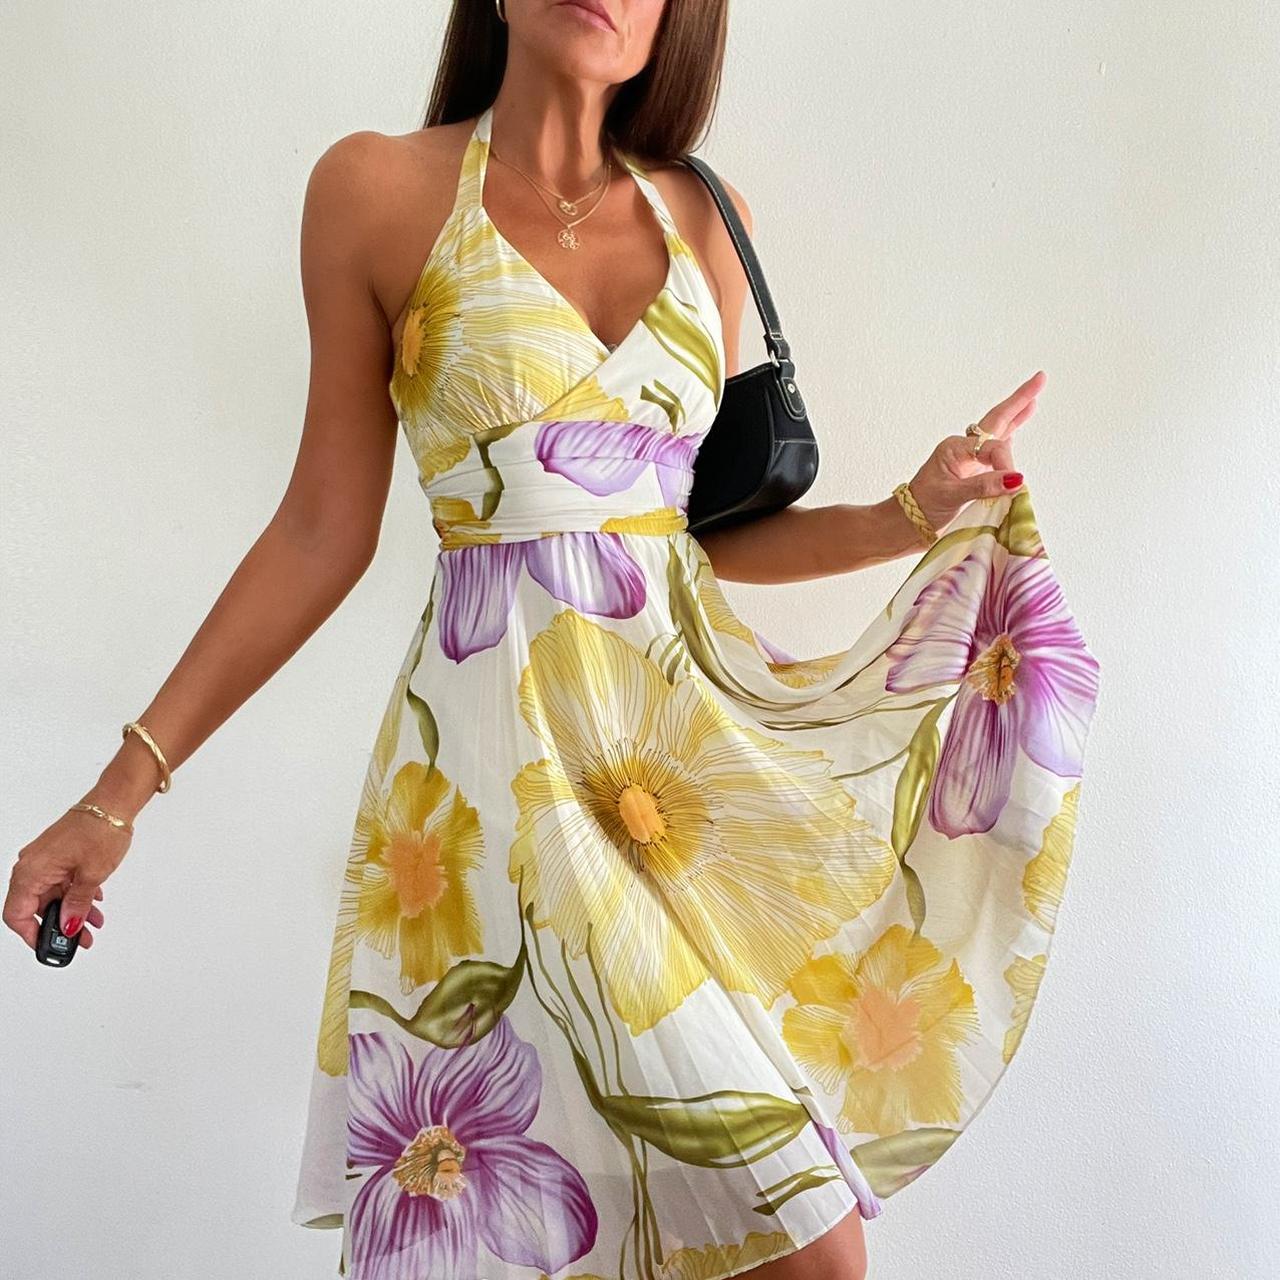 Product Image 2 - Vintage floral watercolor midi dress

The